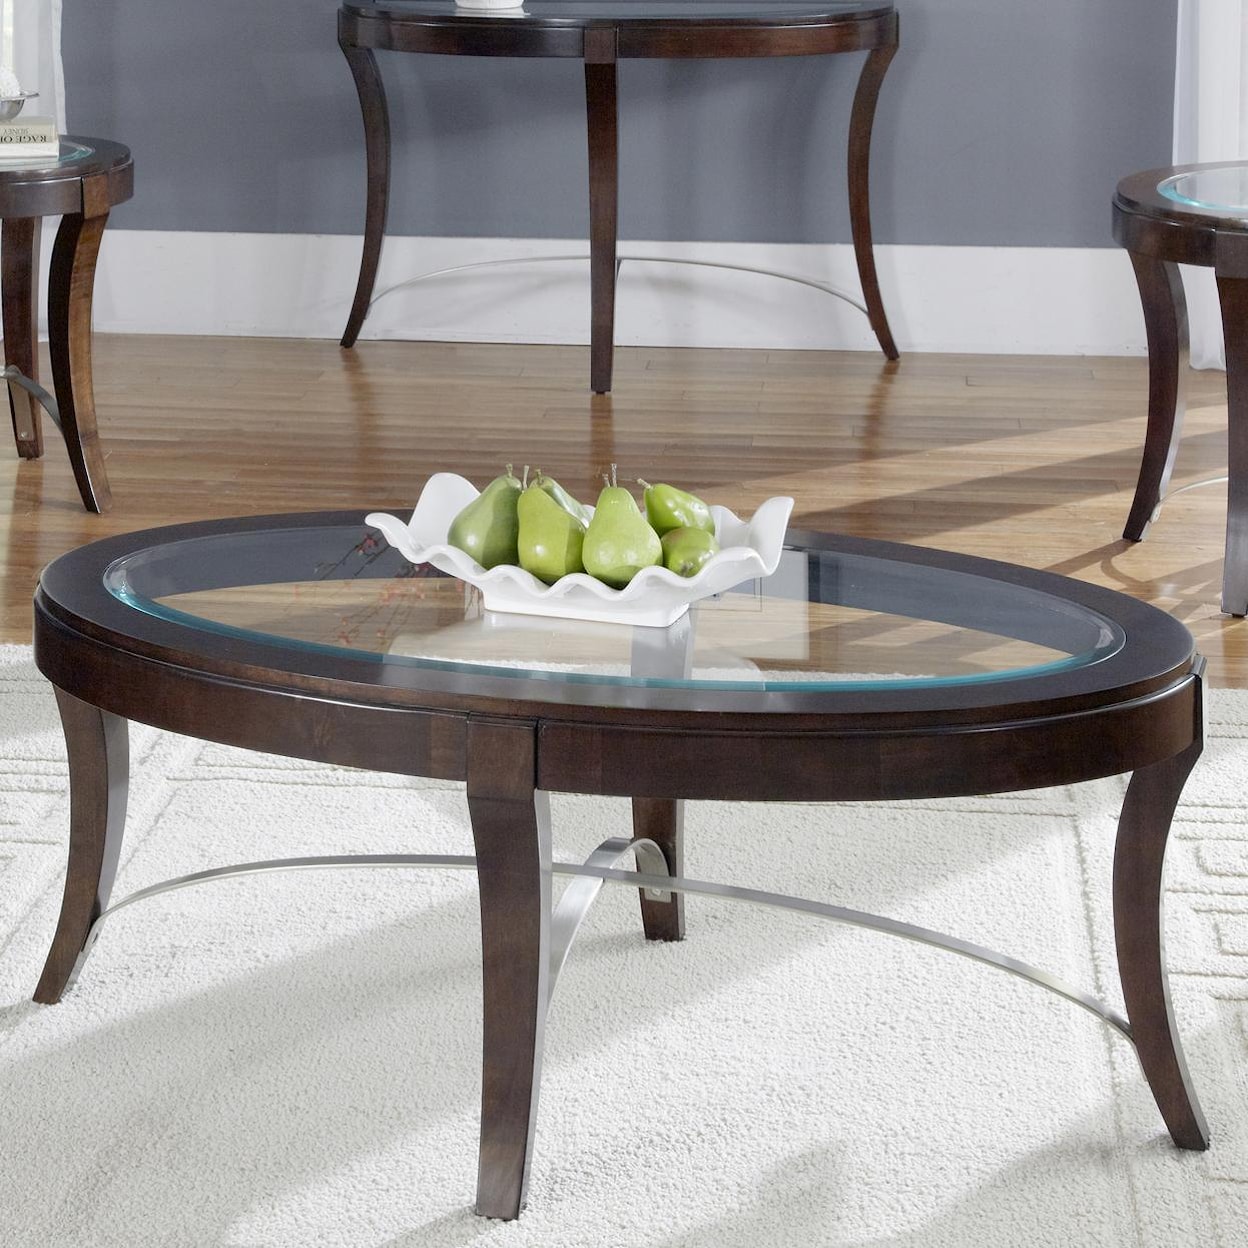 Liberty Furniture Avalon Oval Cocktail Table